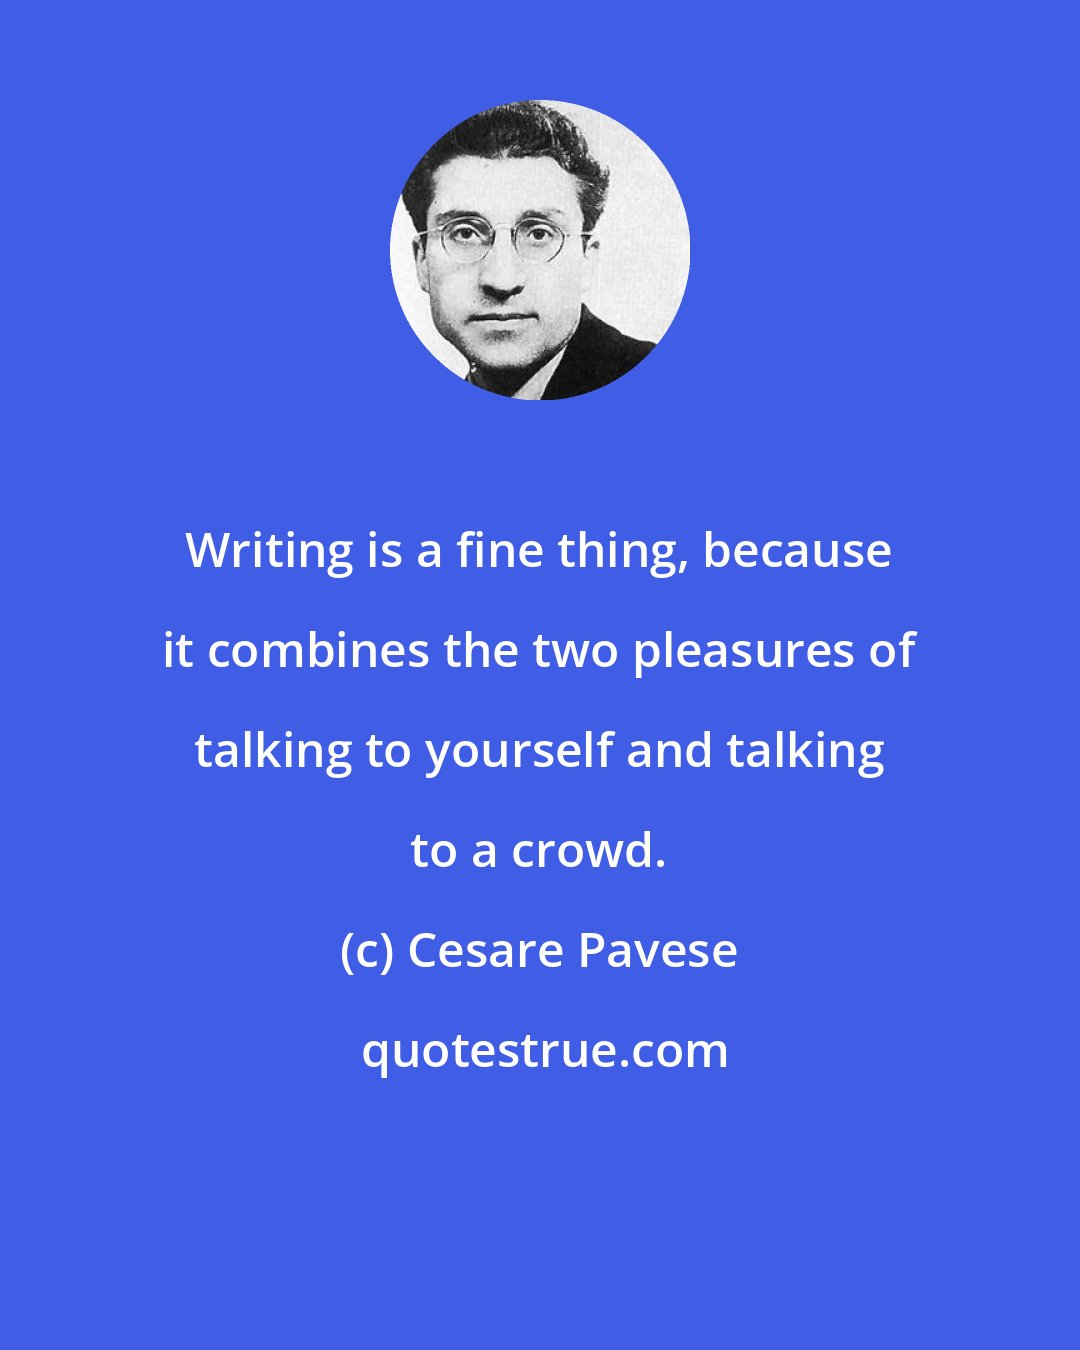 Cesare Pavese: Writing is a fine thing, because it combines the two pleasures of talking to yourself and talking to a crowd.